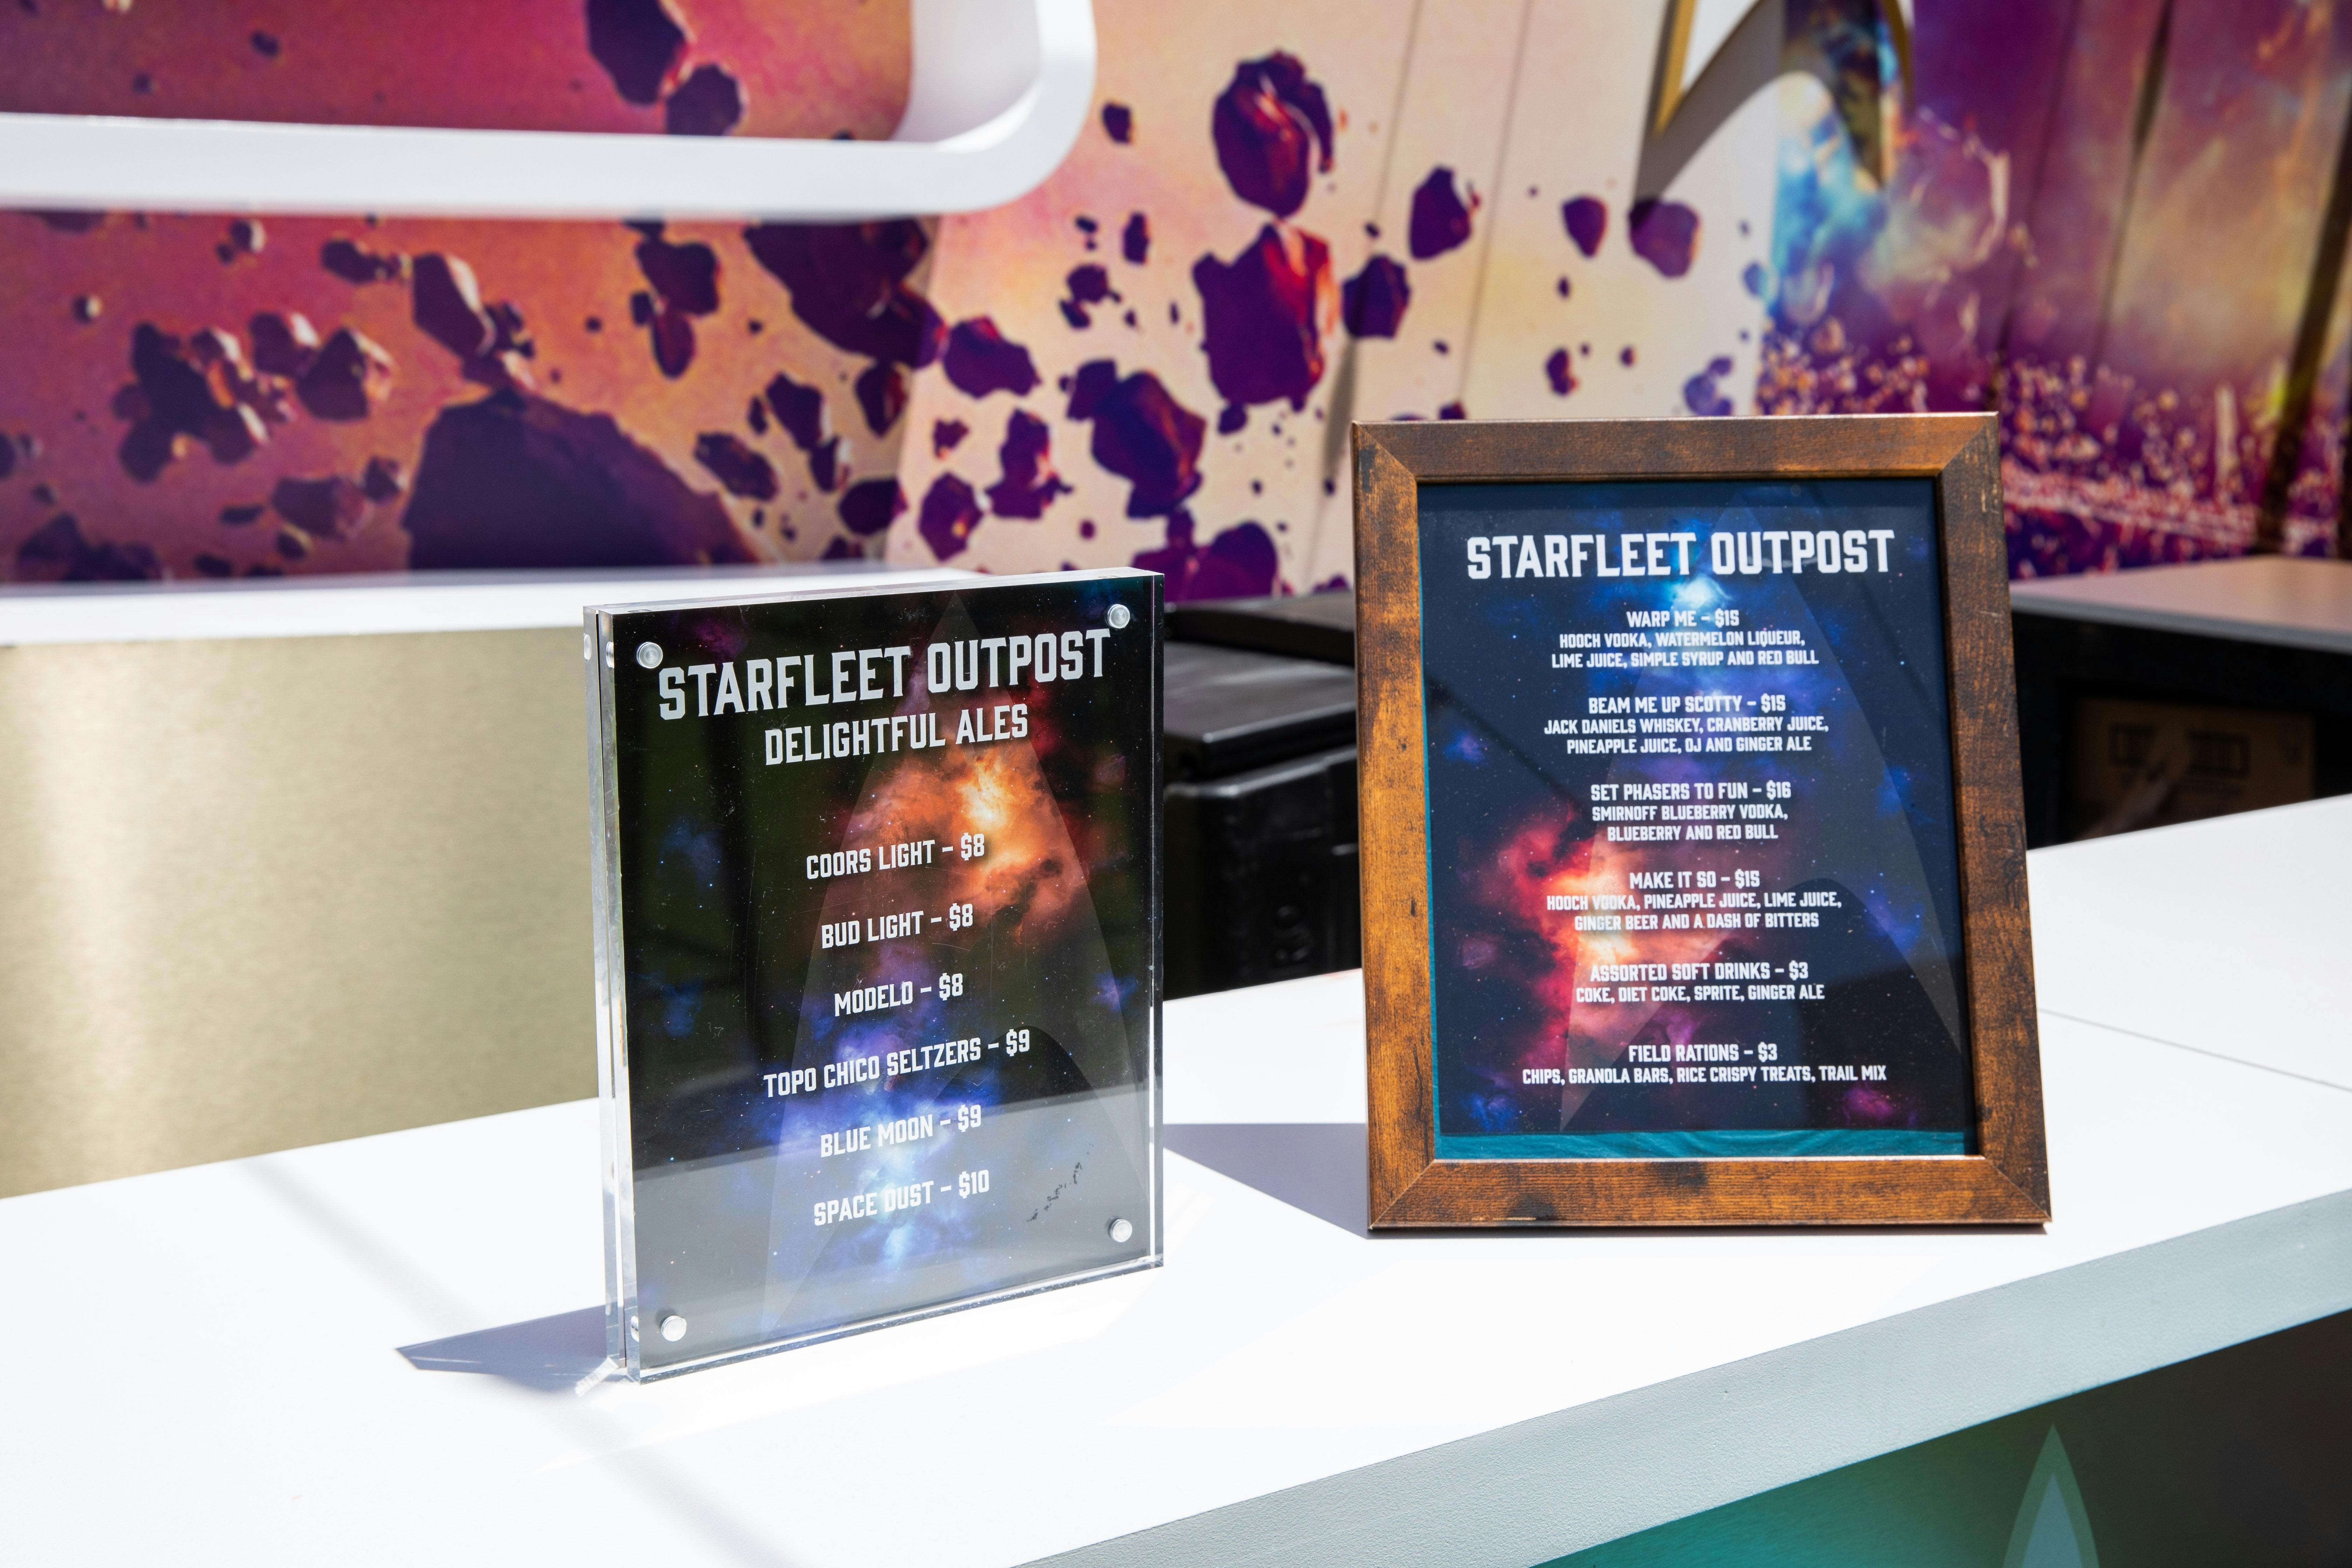 The menus at the Starfleet Outpost.